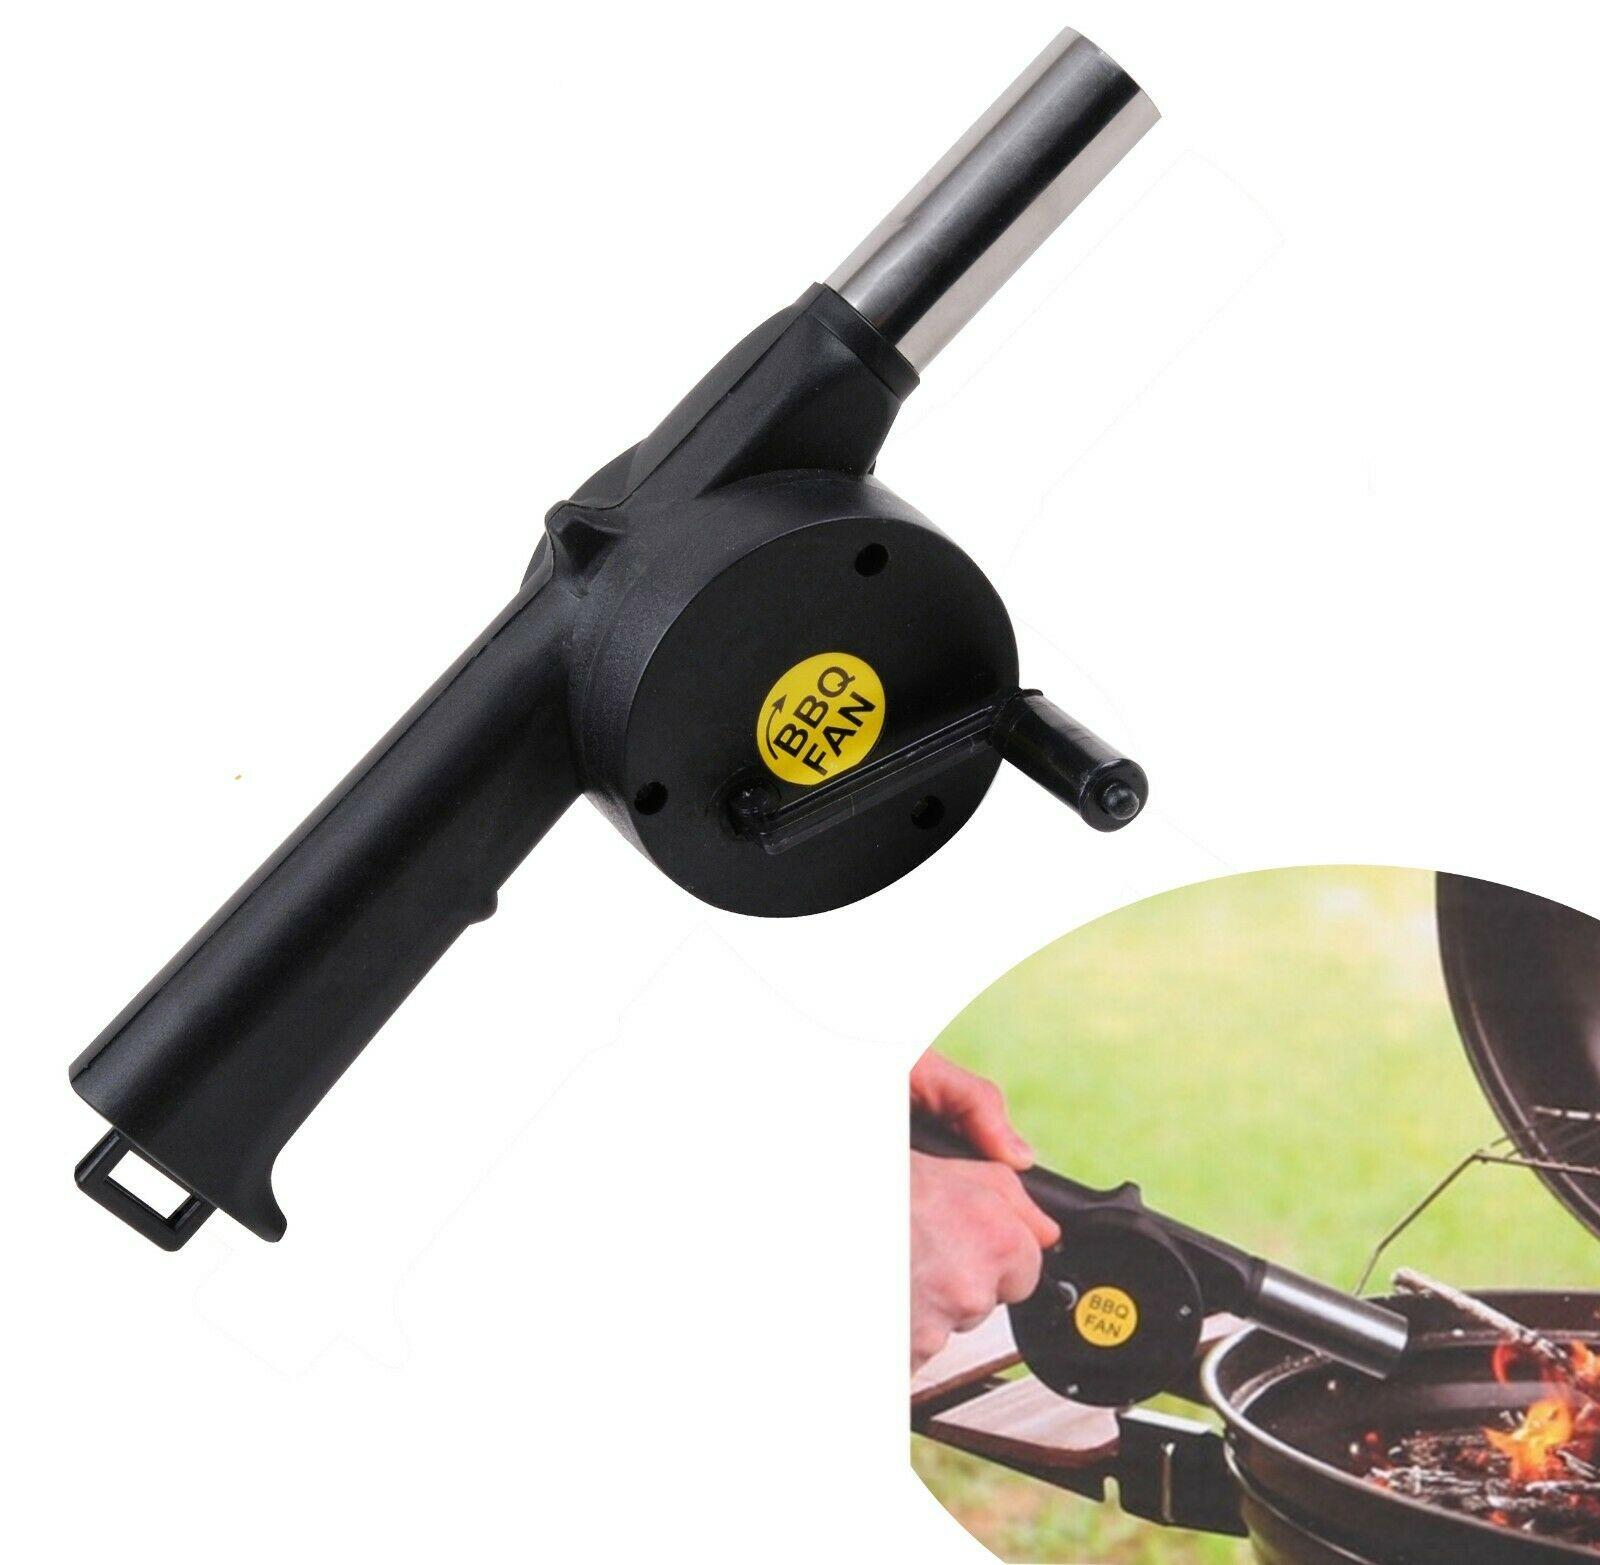 Details about   BBQ Manual Hand Crank Barbecue Charcoal Grill Fire Starter Fan Air Blower tools 